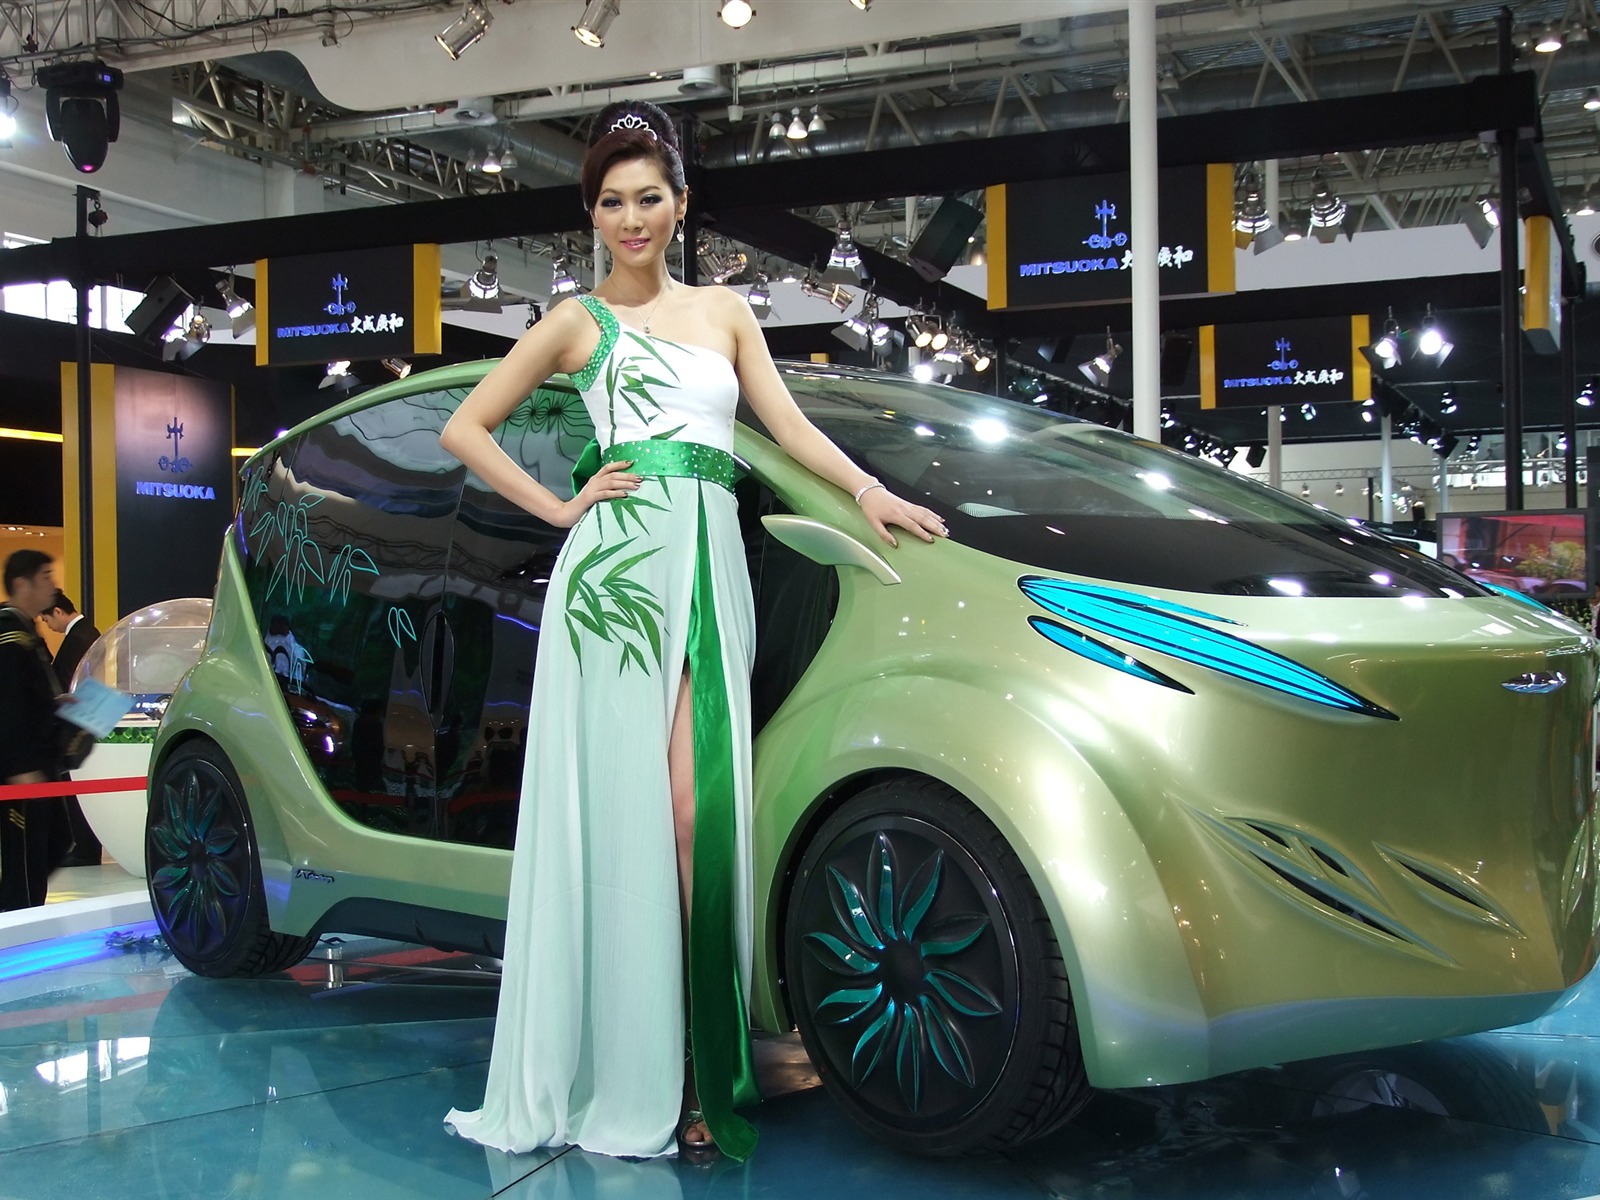 2010 Beijing Auto Show car models Collection (2) #2 - 1600x1200